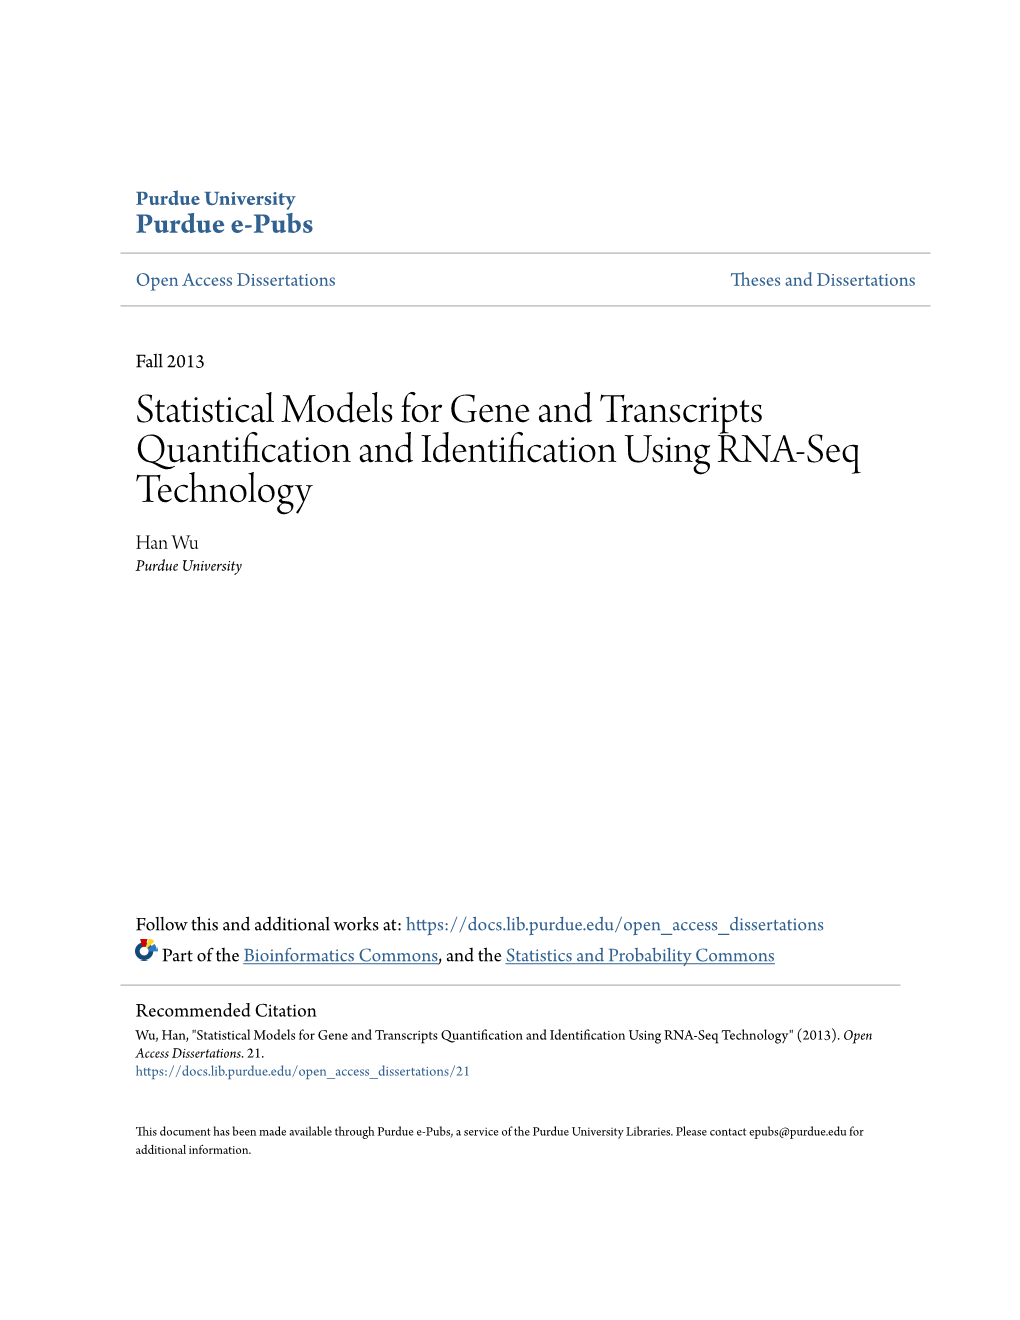 Statistical Models for Gene and Transcripts Quantification and Identification Using RNA-Seq Technology Han Wu Purdue University